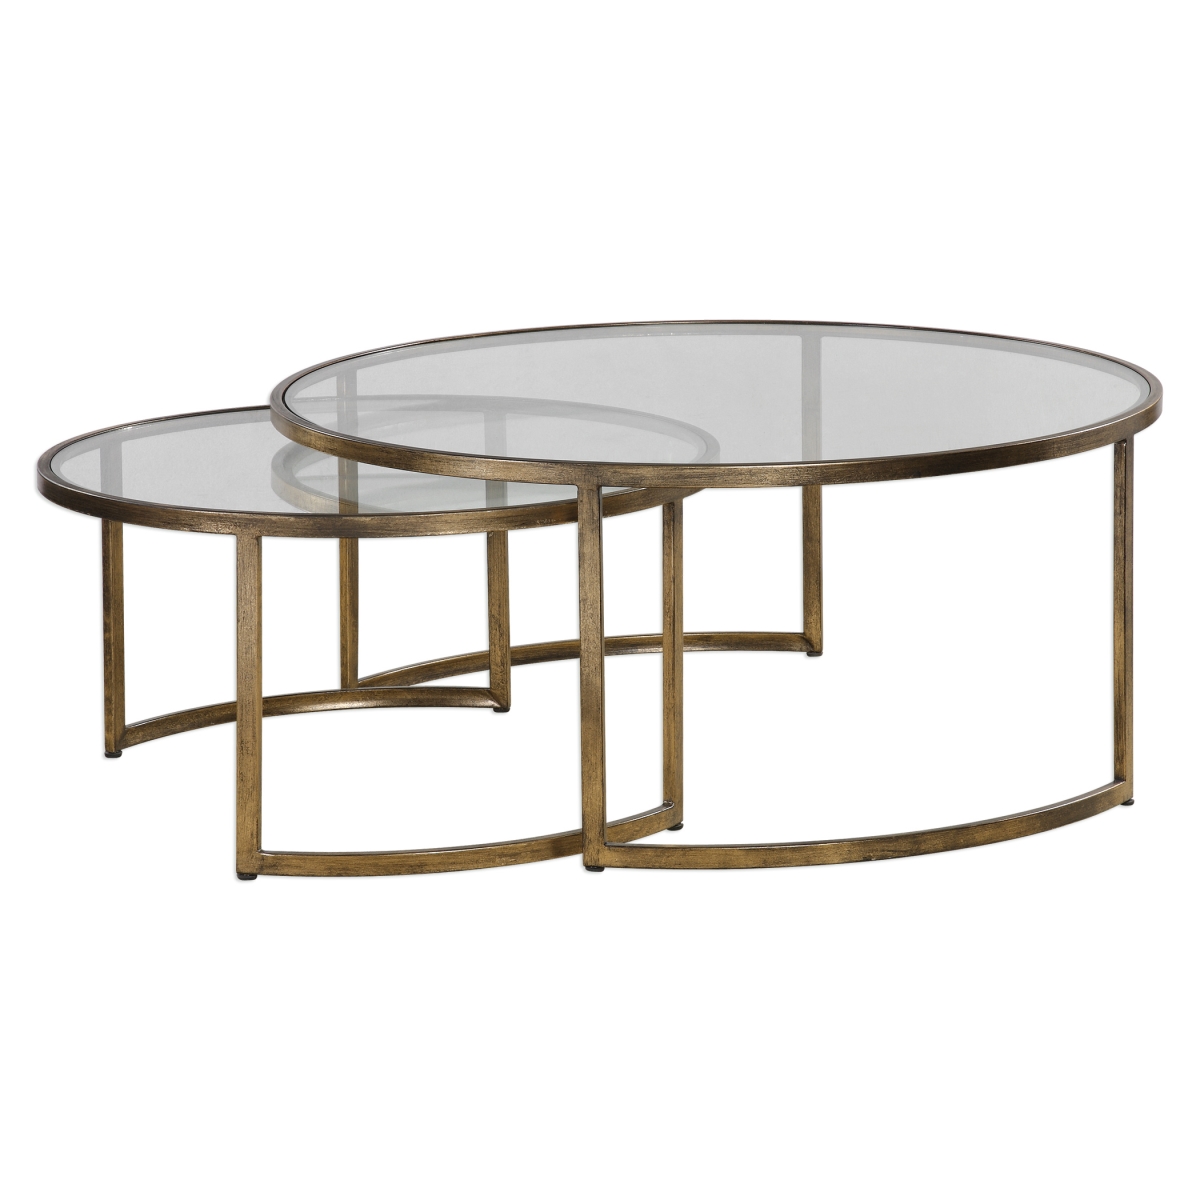 Picture of 212 Main 24747 Rhea Nested Coffee Tables  Set of 2